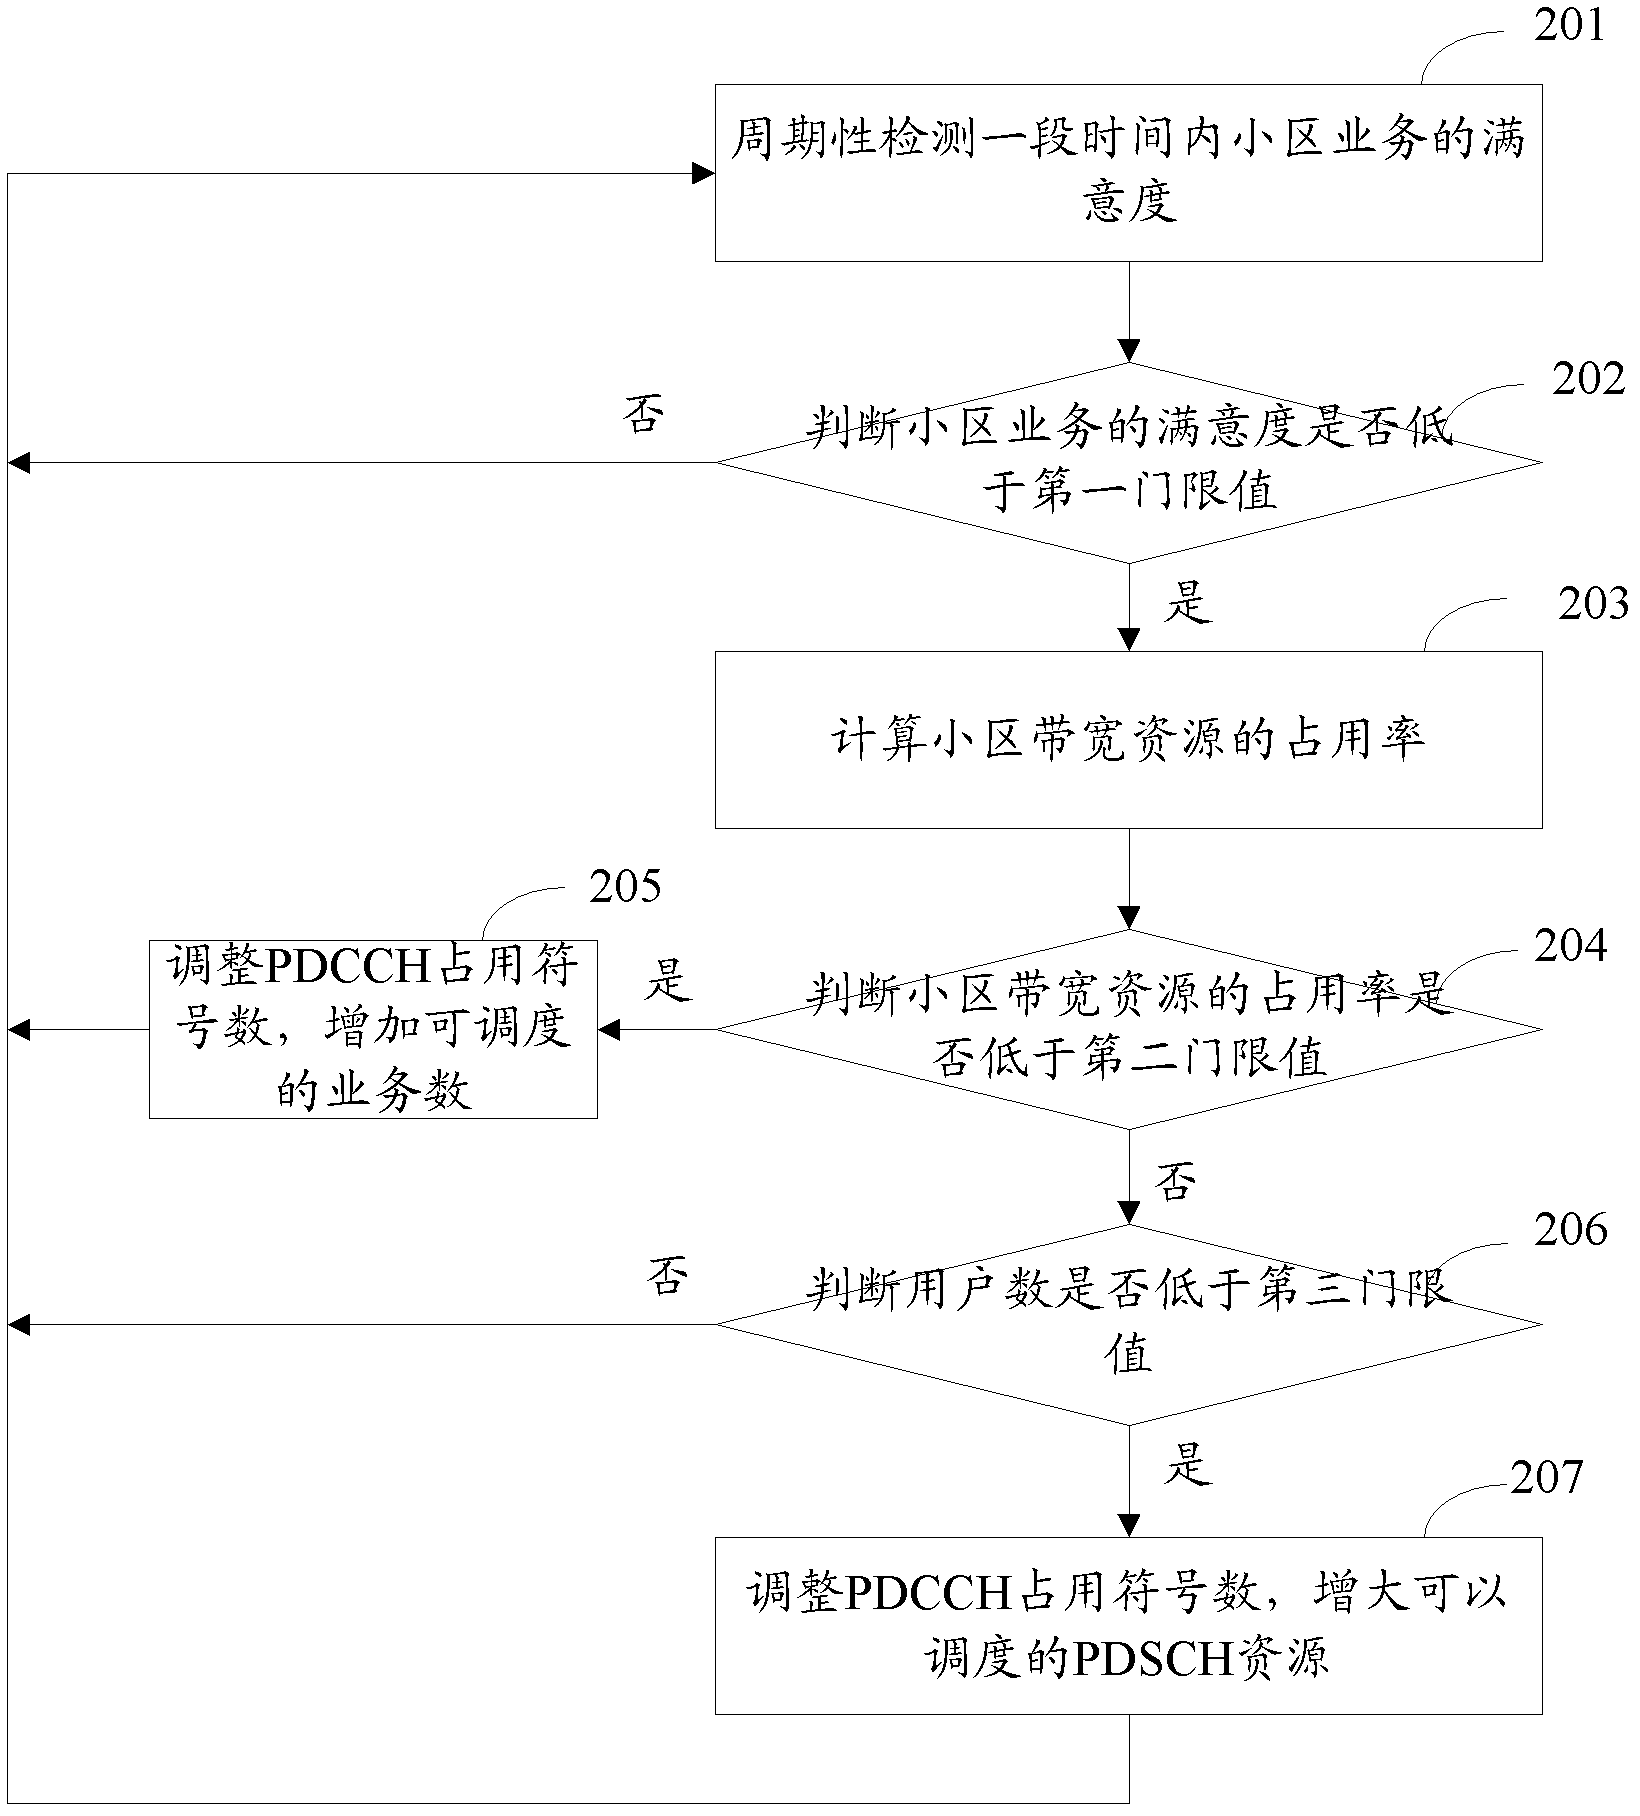 Method for self-adaptive adjustment on symbol occupation amount of PDCCH (Physical Downlink Control Channel)